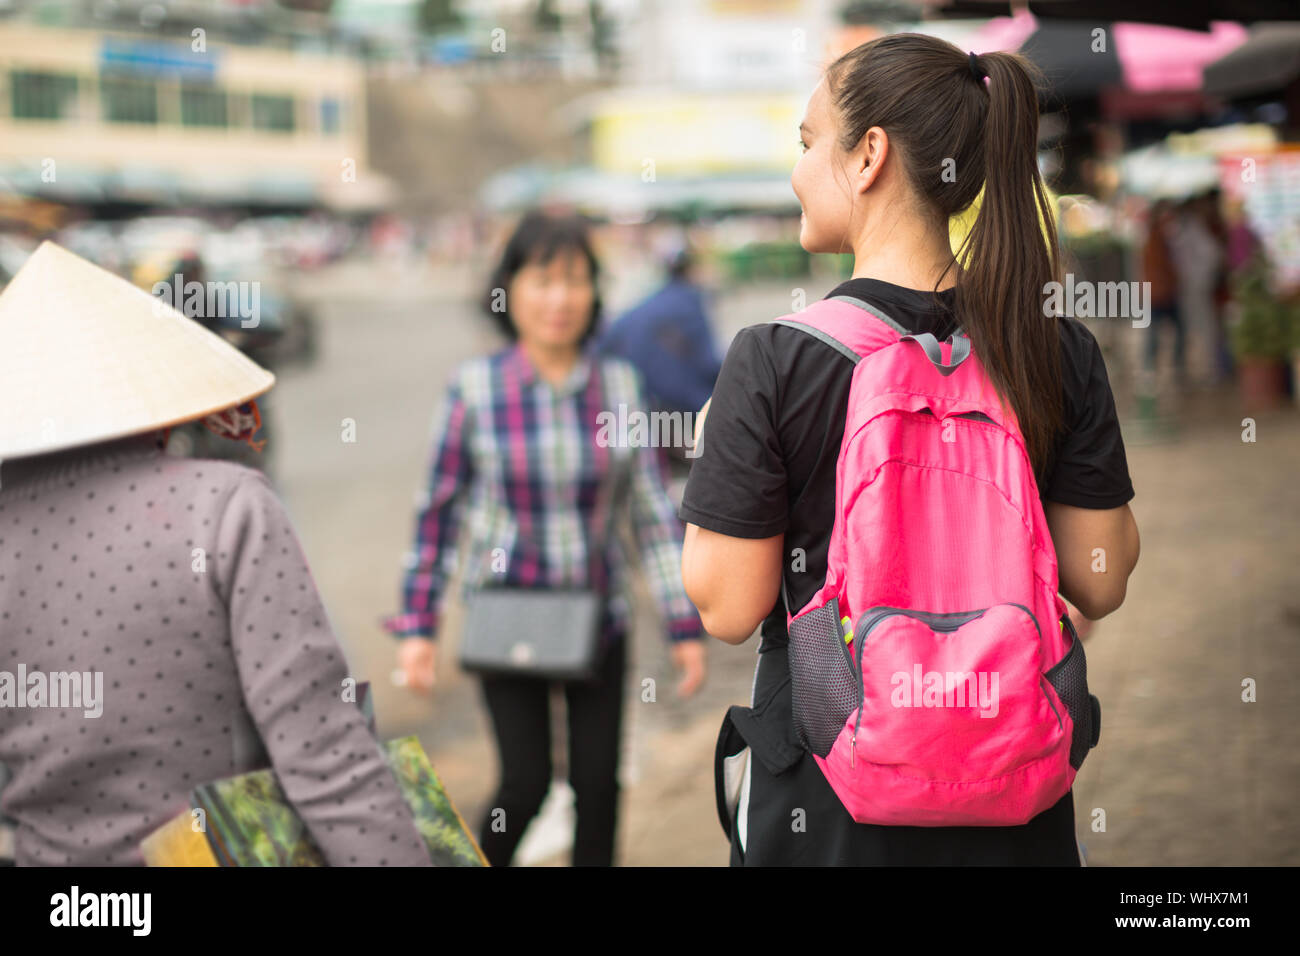 A female backpacker walking through the outdoor streetmarket, shopping. Exploration and adventure. Stock Photo